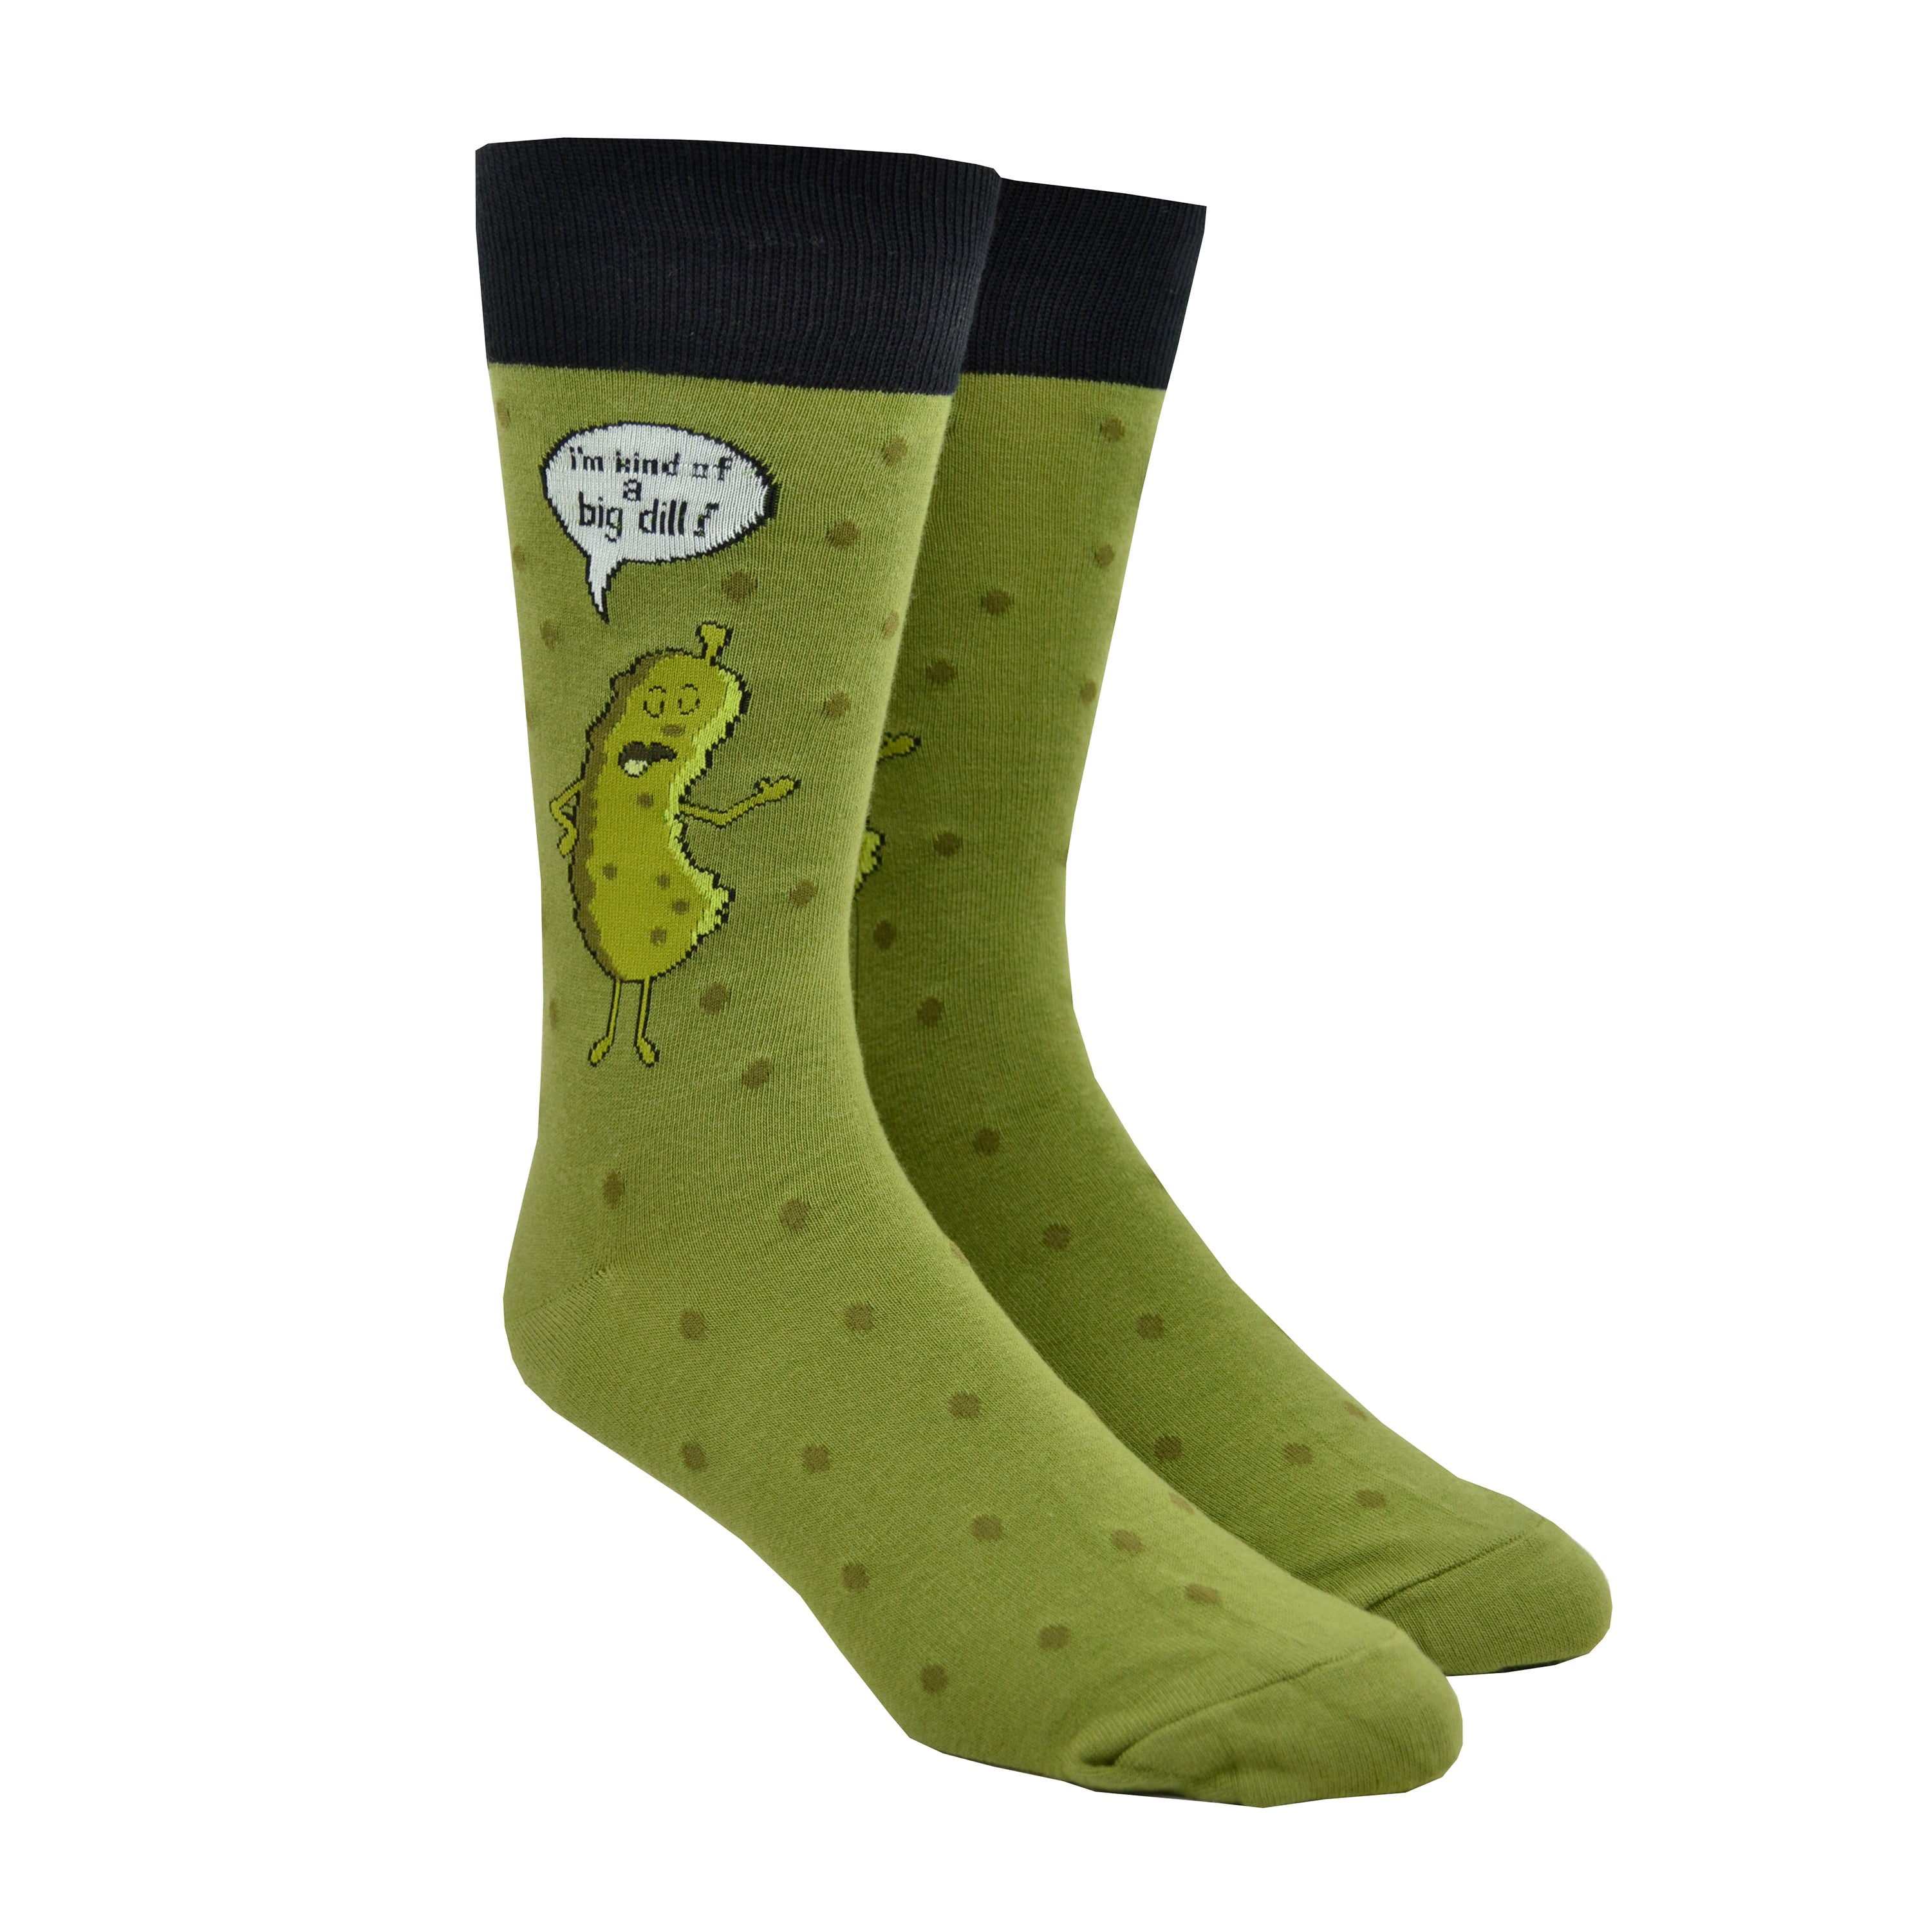 Shown on a leg form, these green cotton funny men's crew socks with a black cuff by the brand Foot Traffic have a picture of a talking dill pickle on them and a word bubble that says 